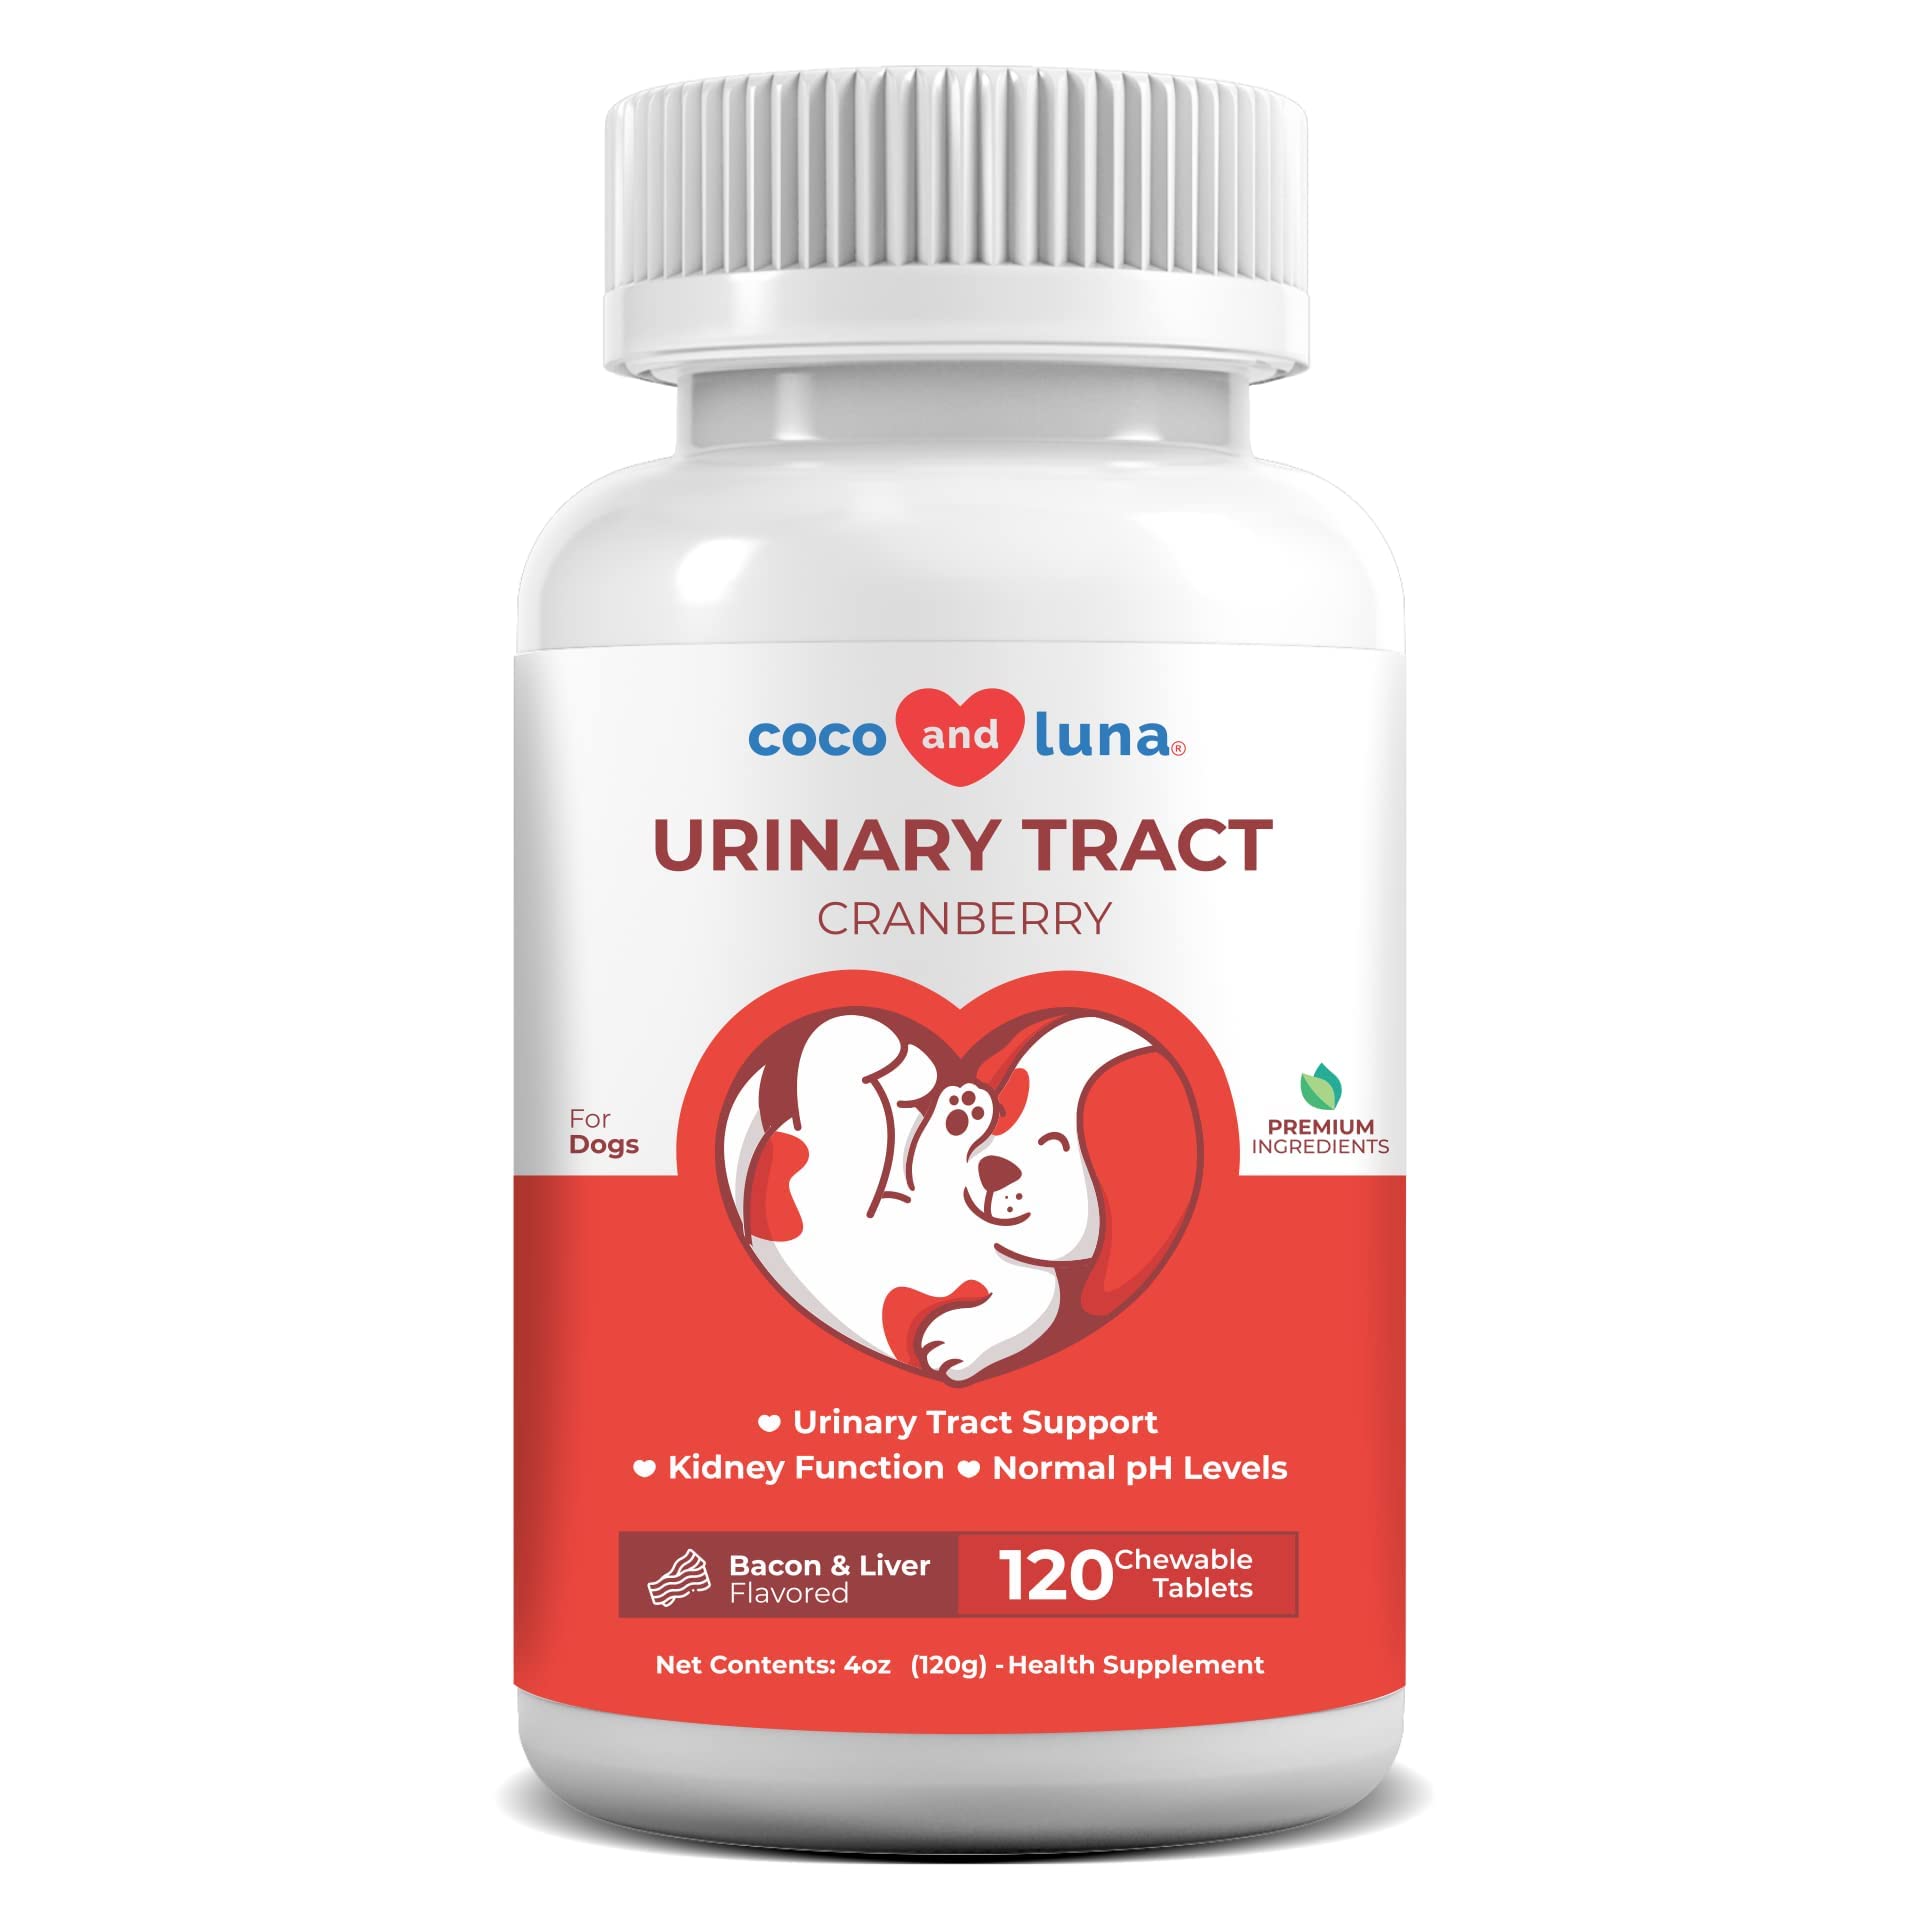 Cranberry for Dogs Urinary Tract Support Chewable Tablets 120 Tablets